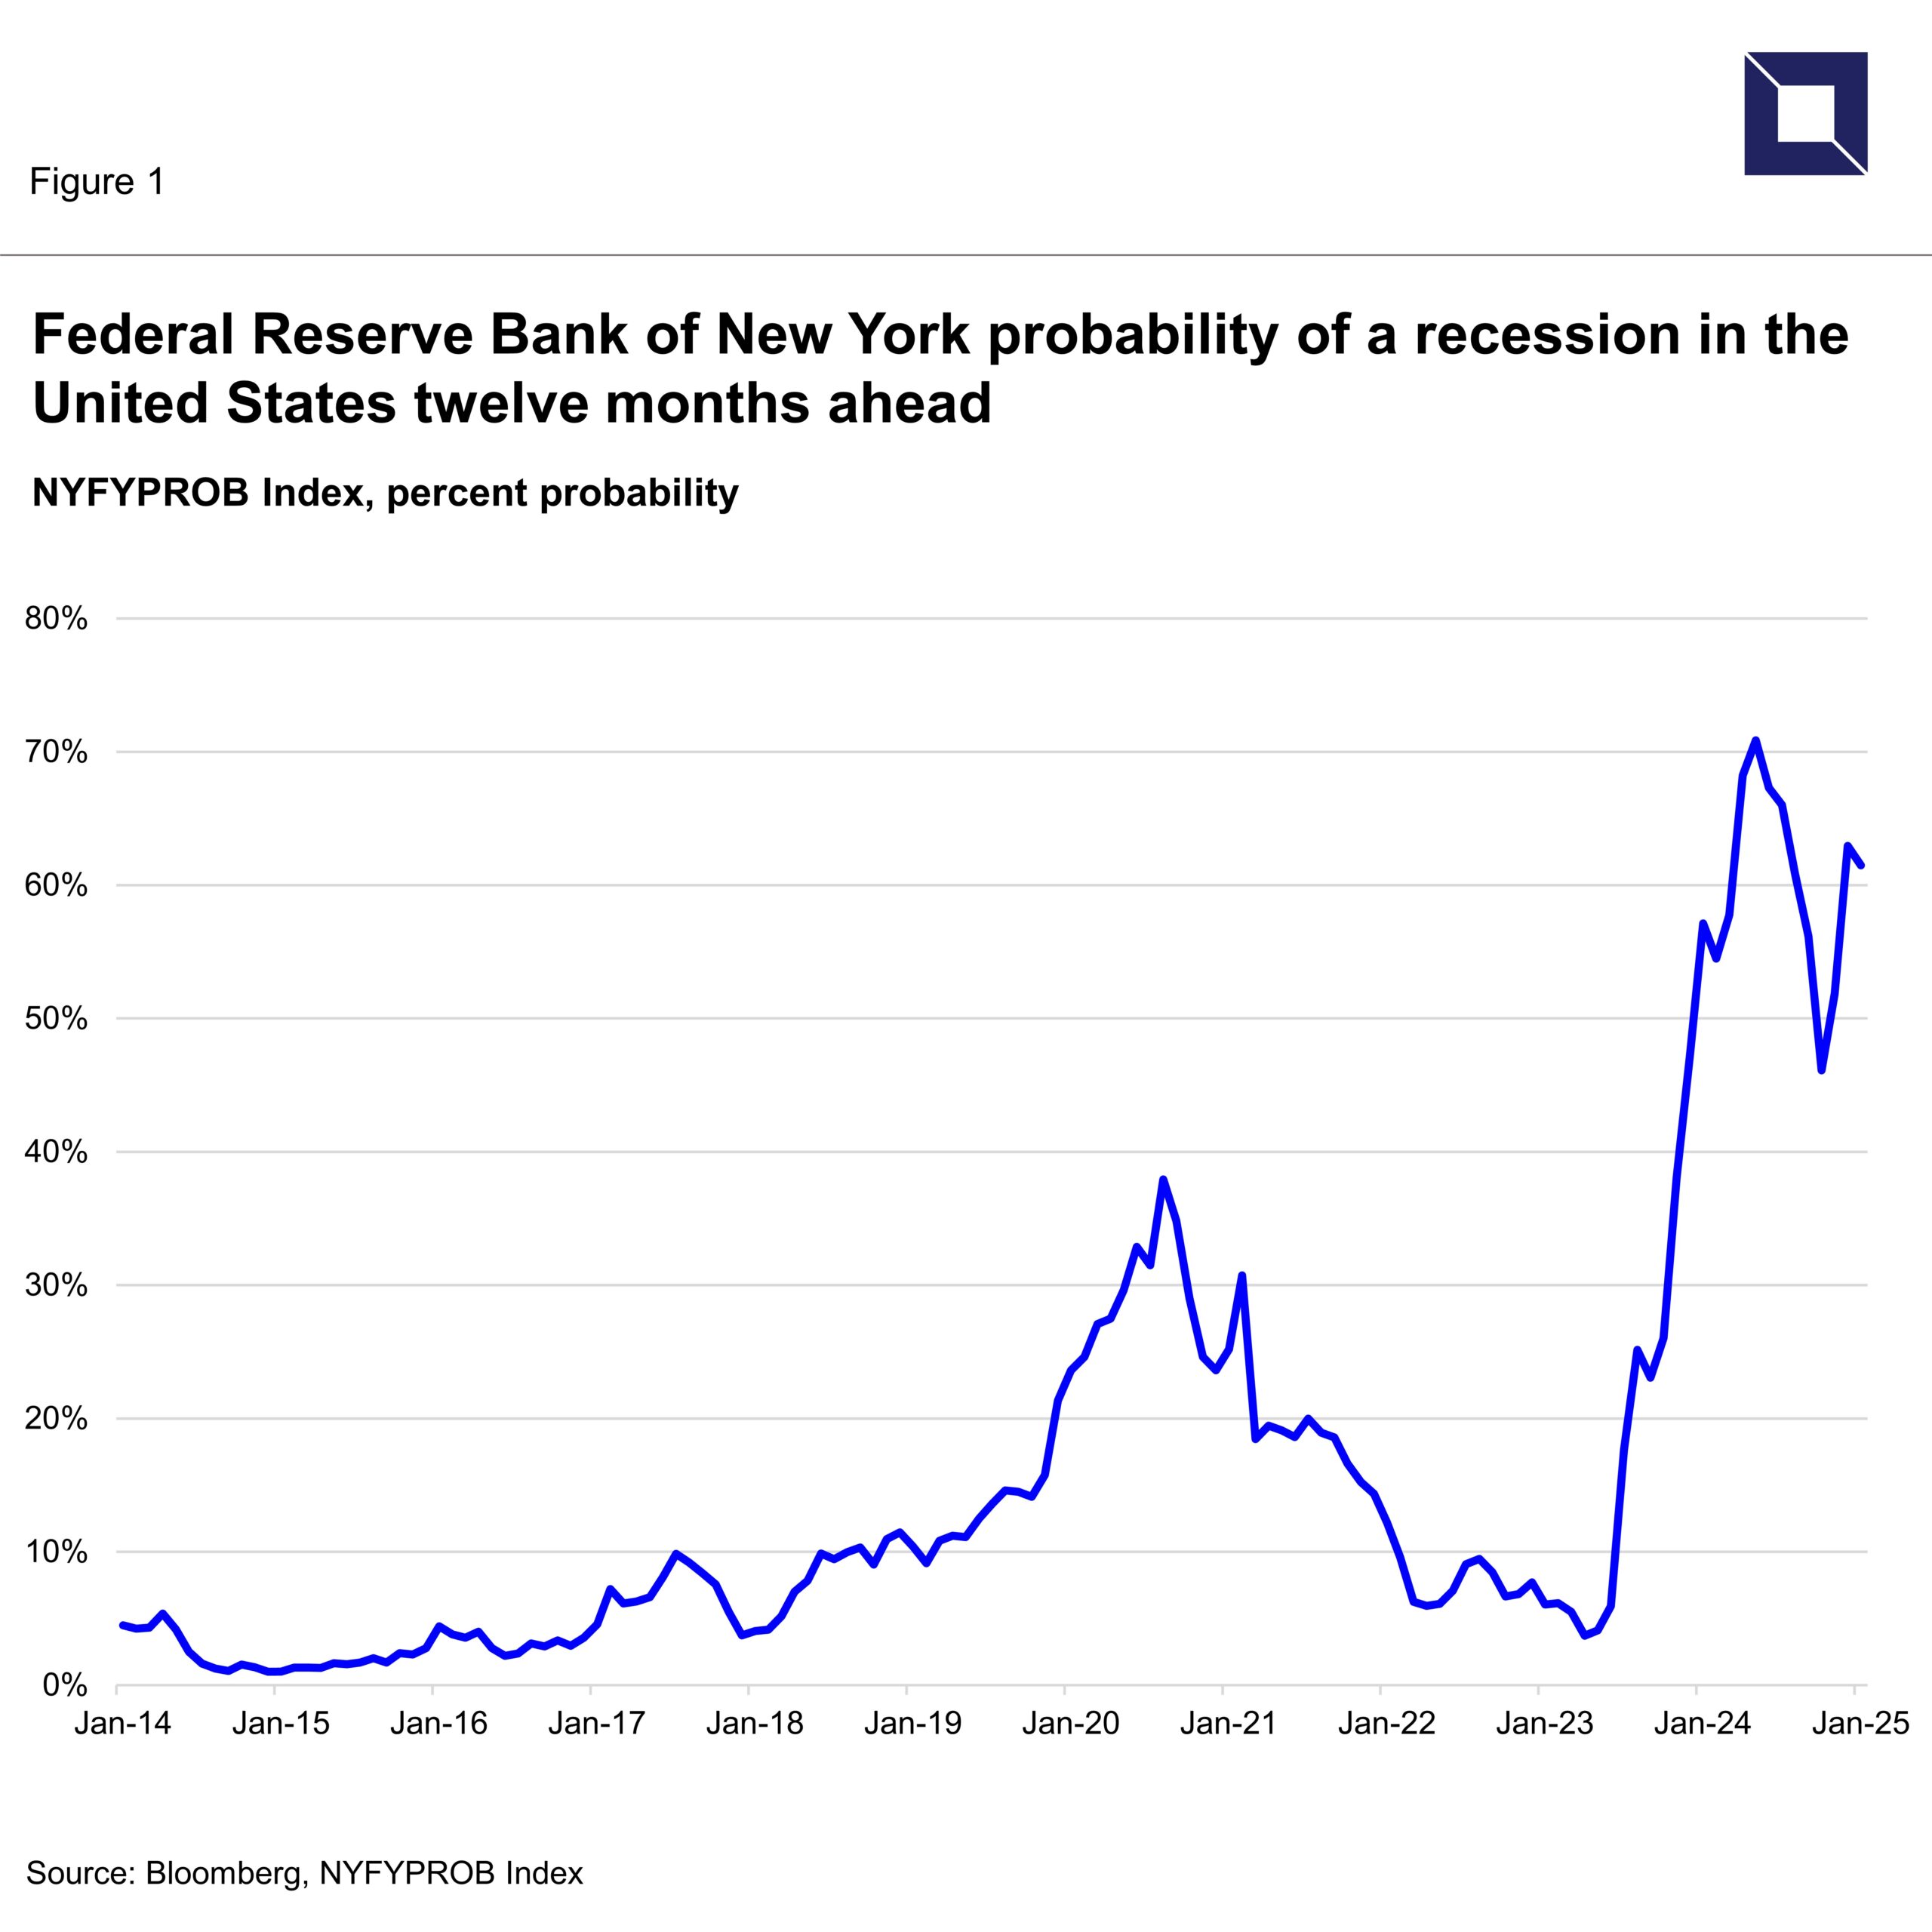 Federal Reserve Bank of New York probability of a recession in the United States twelve months ahead (source: Bloomberg as of 2/19/24, NYFYPROB Index).